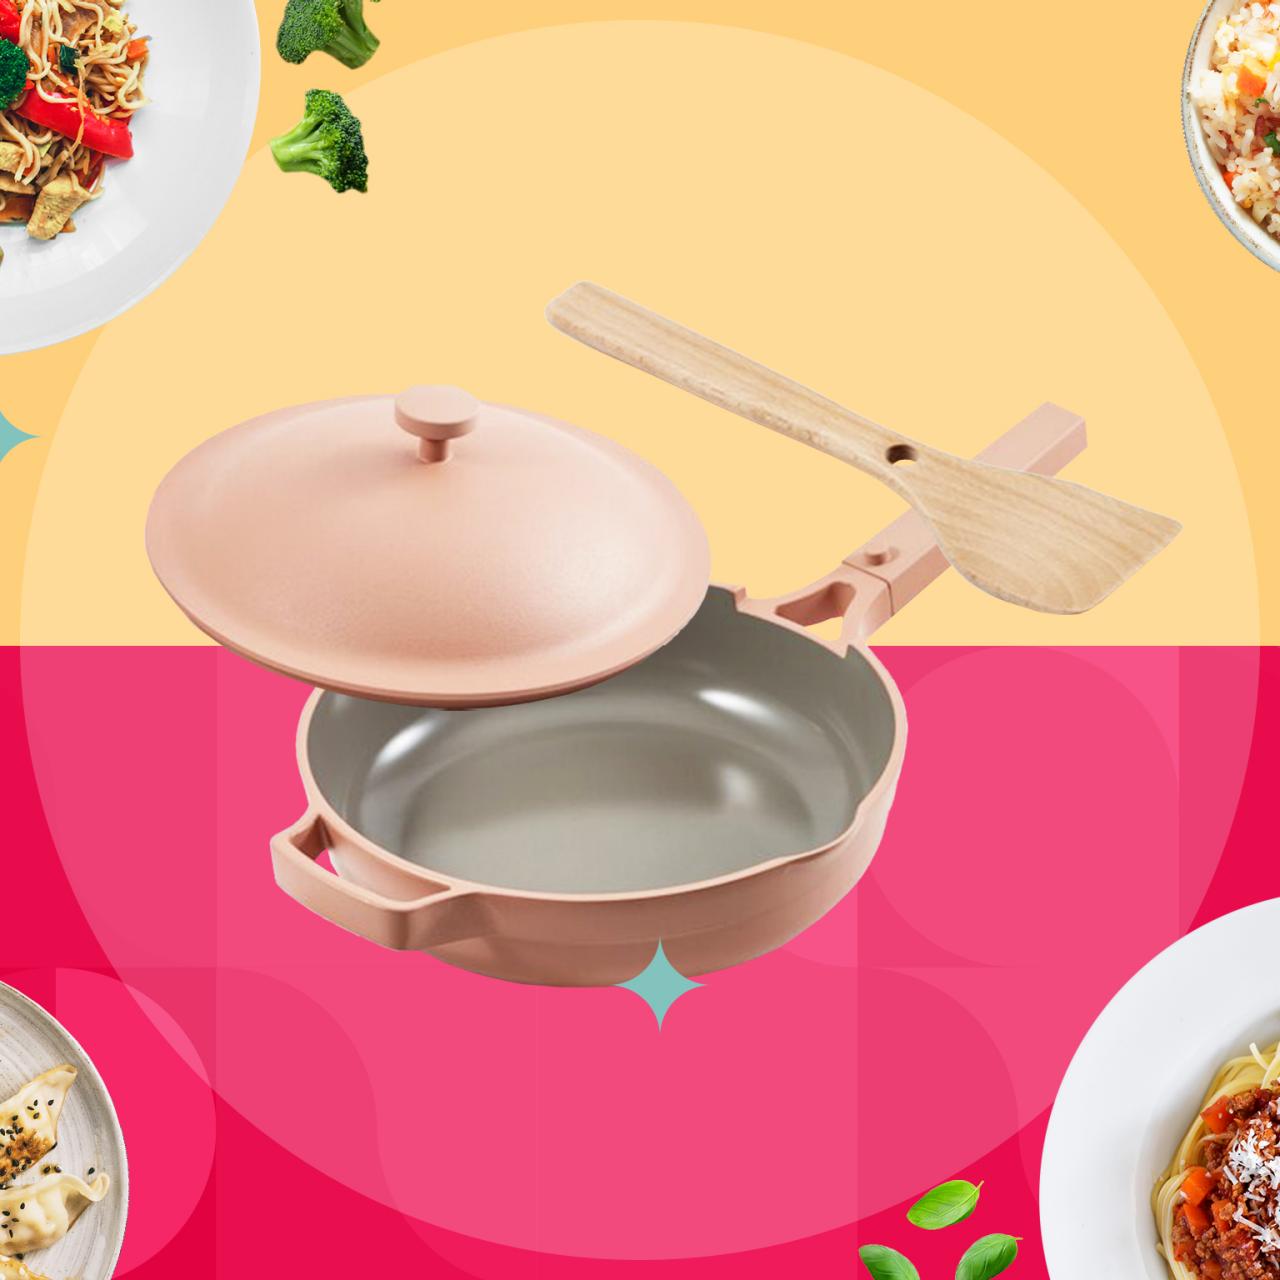 Always Pan review: Is this Insta-famous piece cookware worth all